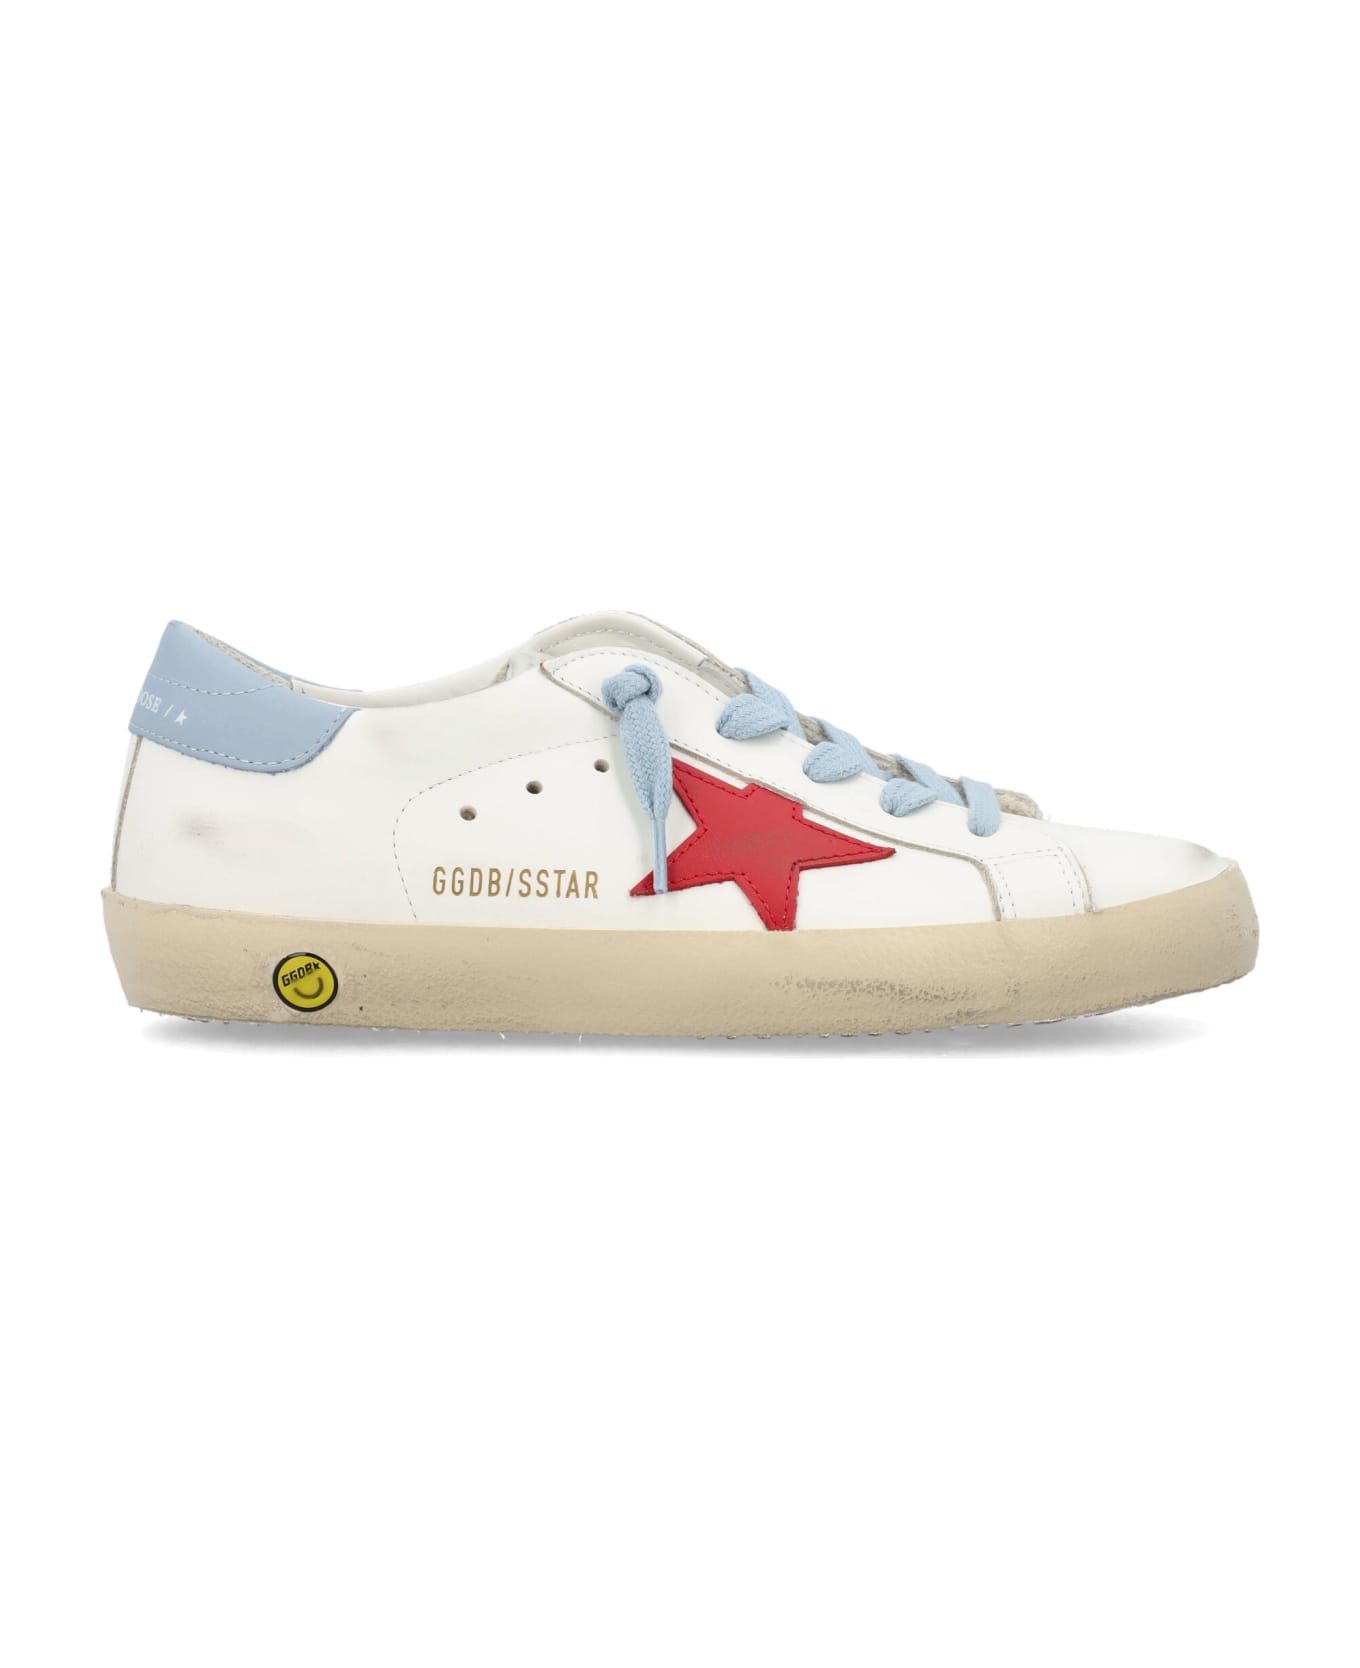 Golden Goose Super Star Sneakers - WHITE/RED/BLUE